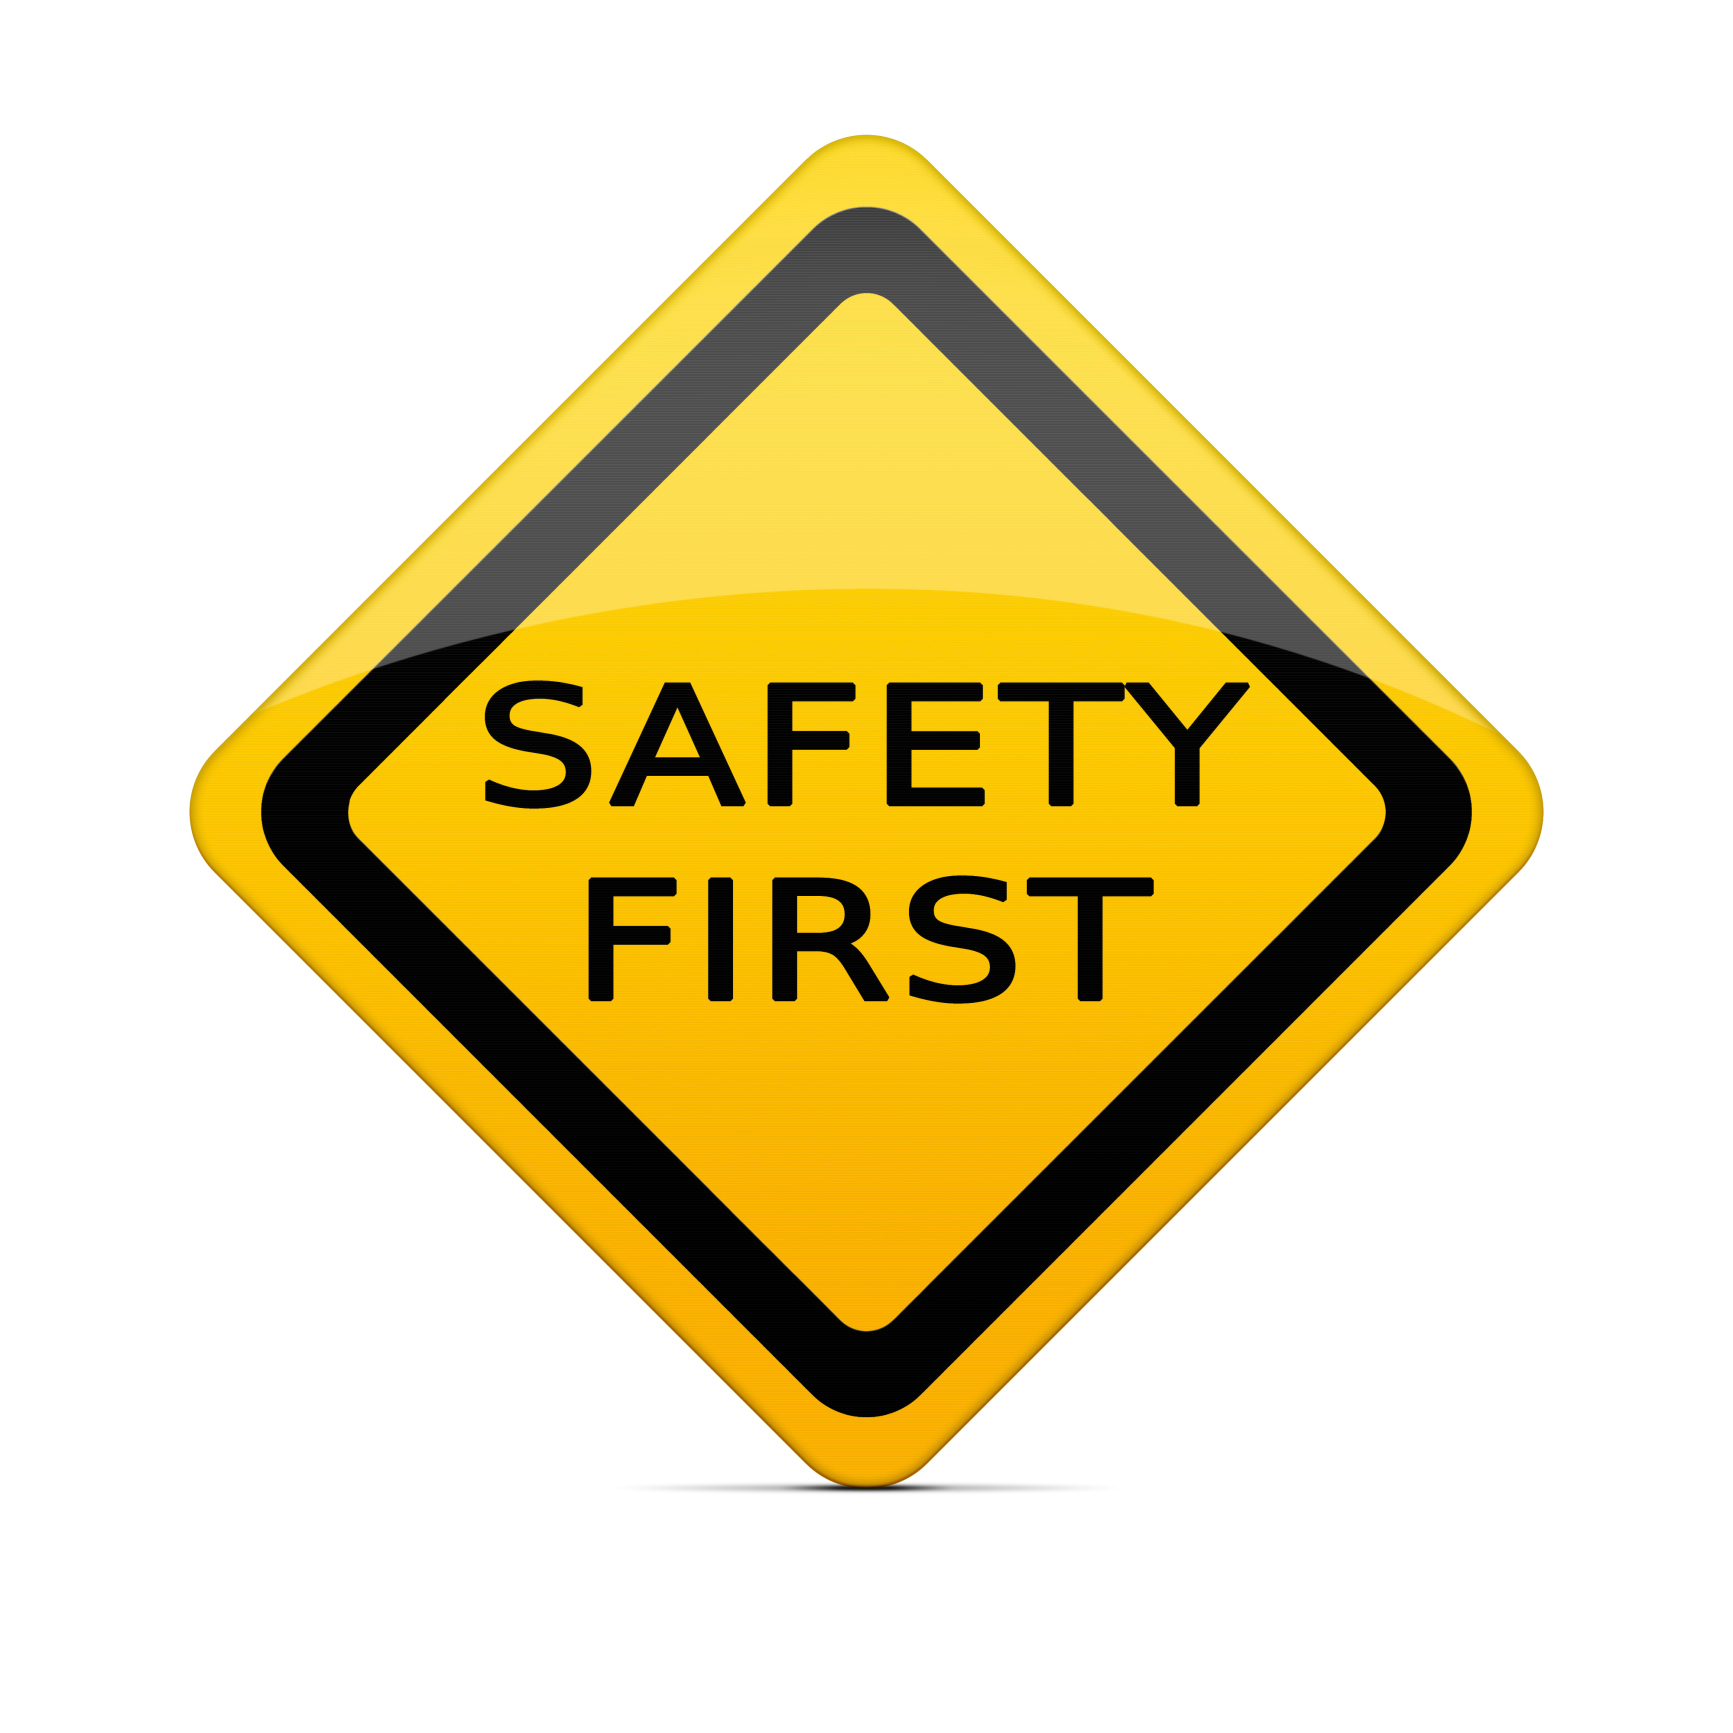 safety clip art free download - photo #3